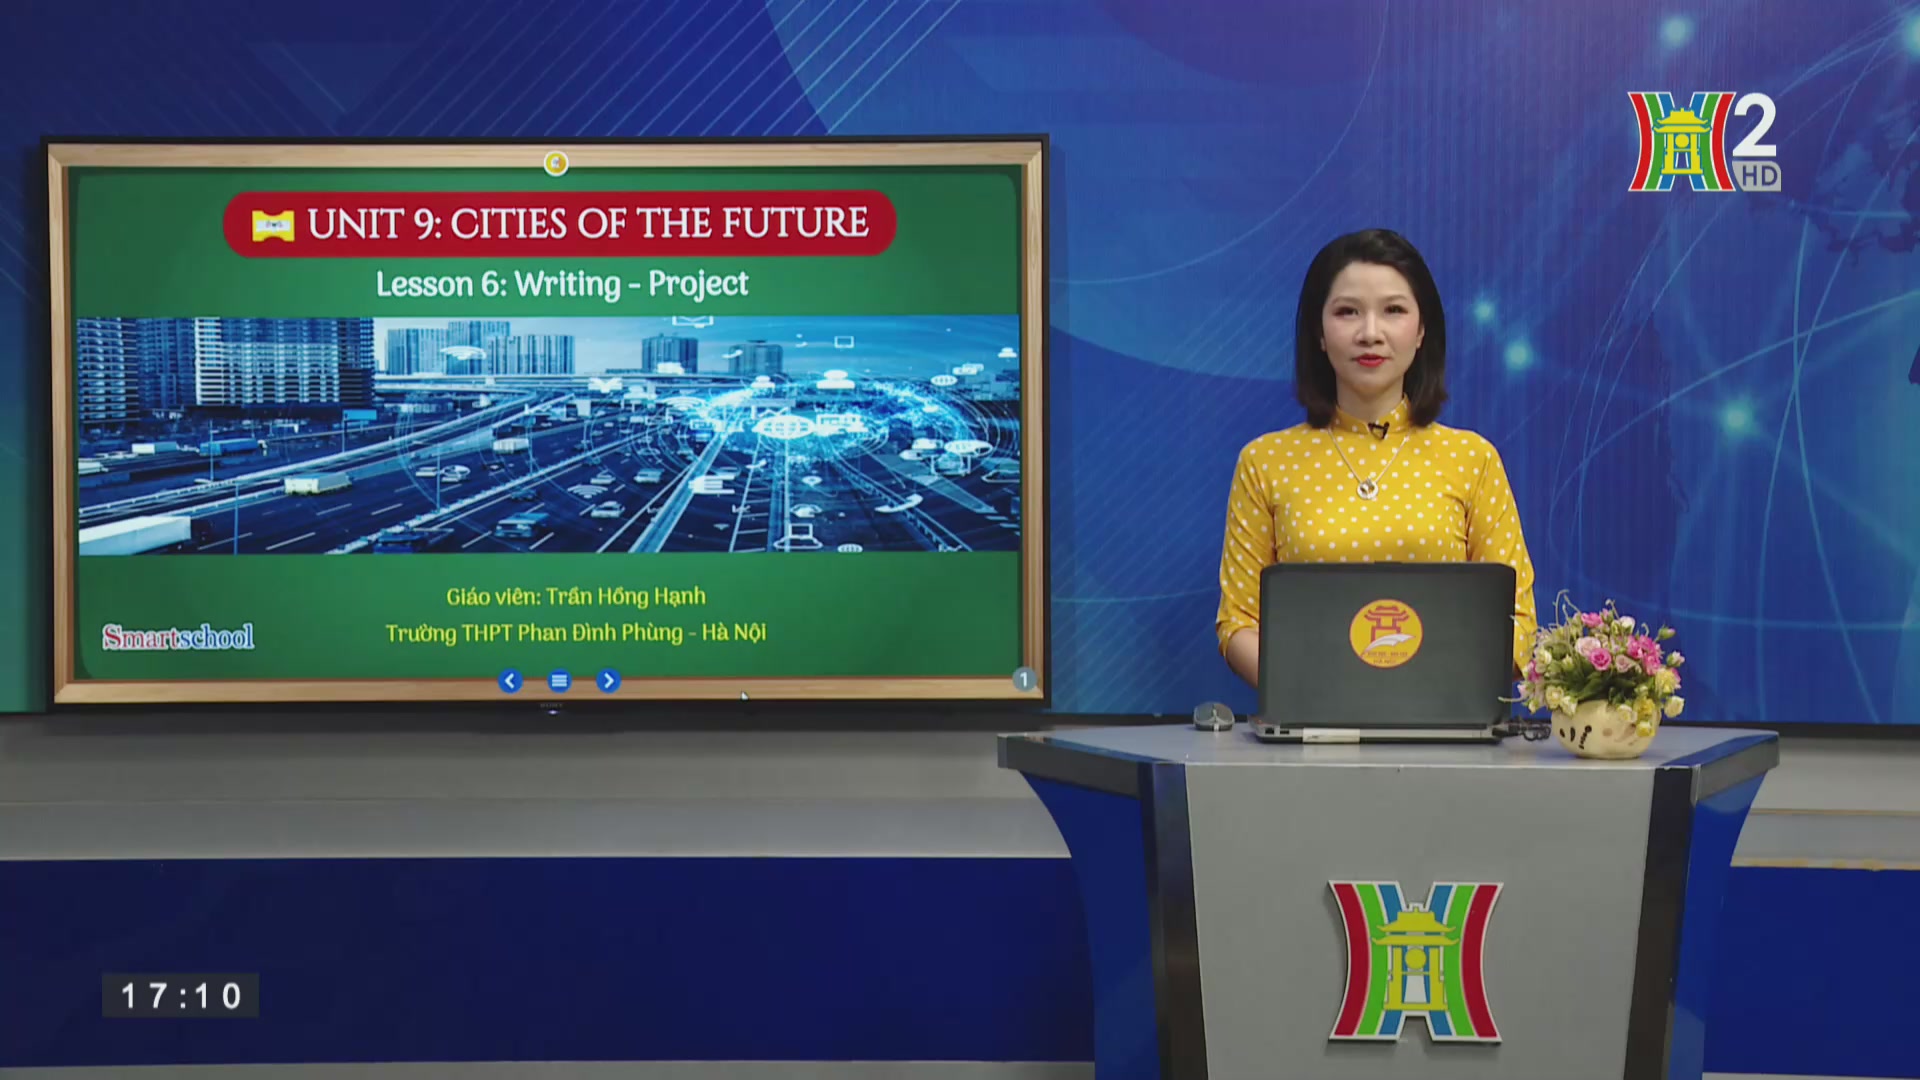 Tiếng anh lớp 11: Unit 9: Cities of the future - Lesson 6: Writing + Project  (17h10 ngày 8/5/2020)